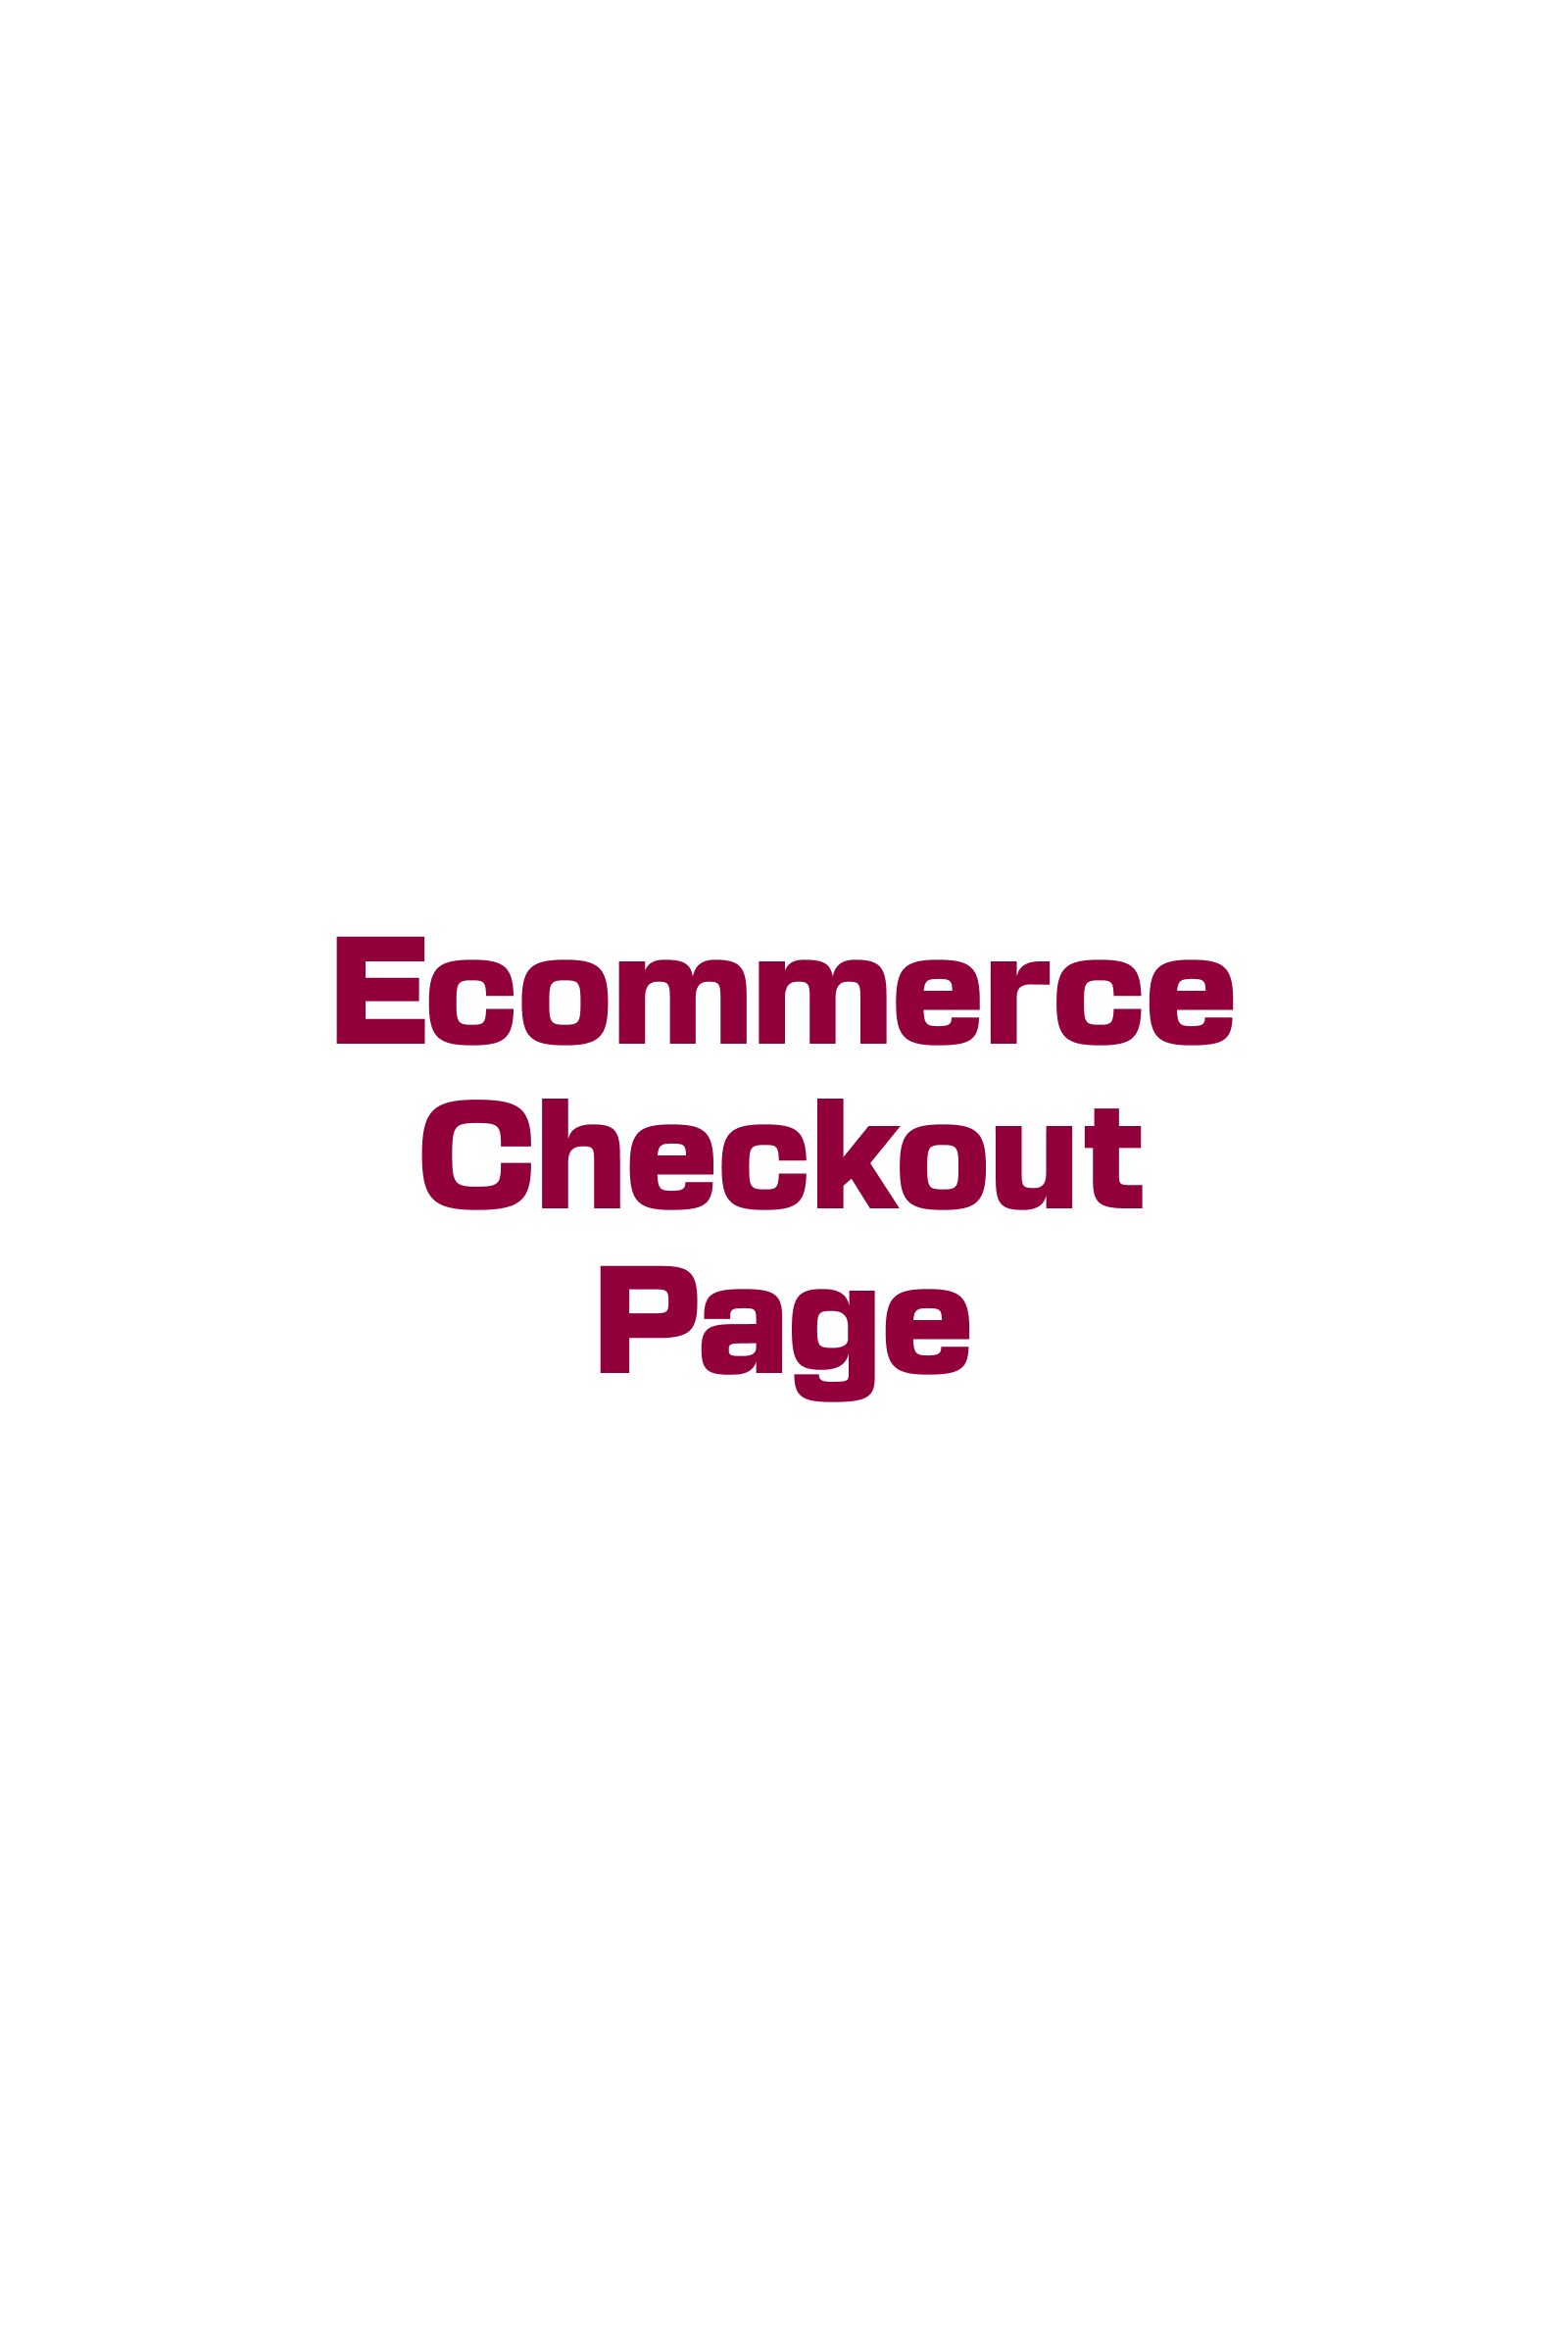 Ecommerce Checkout Page